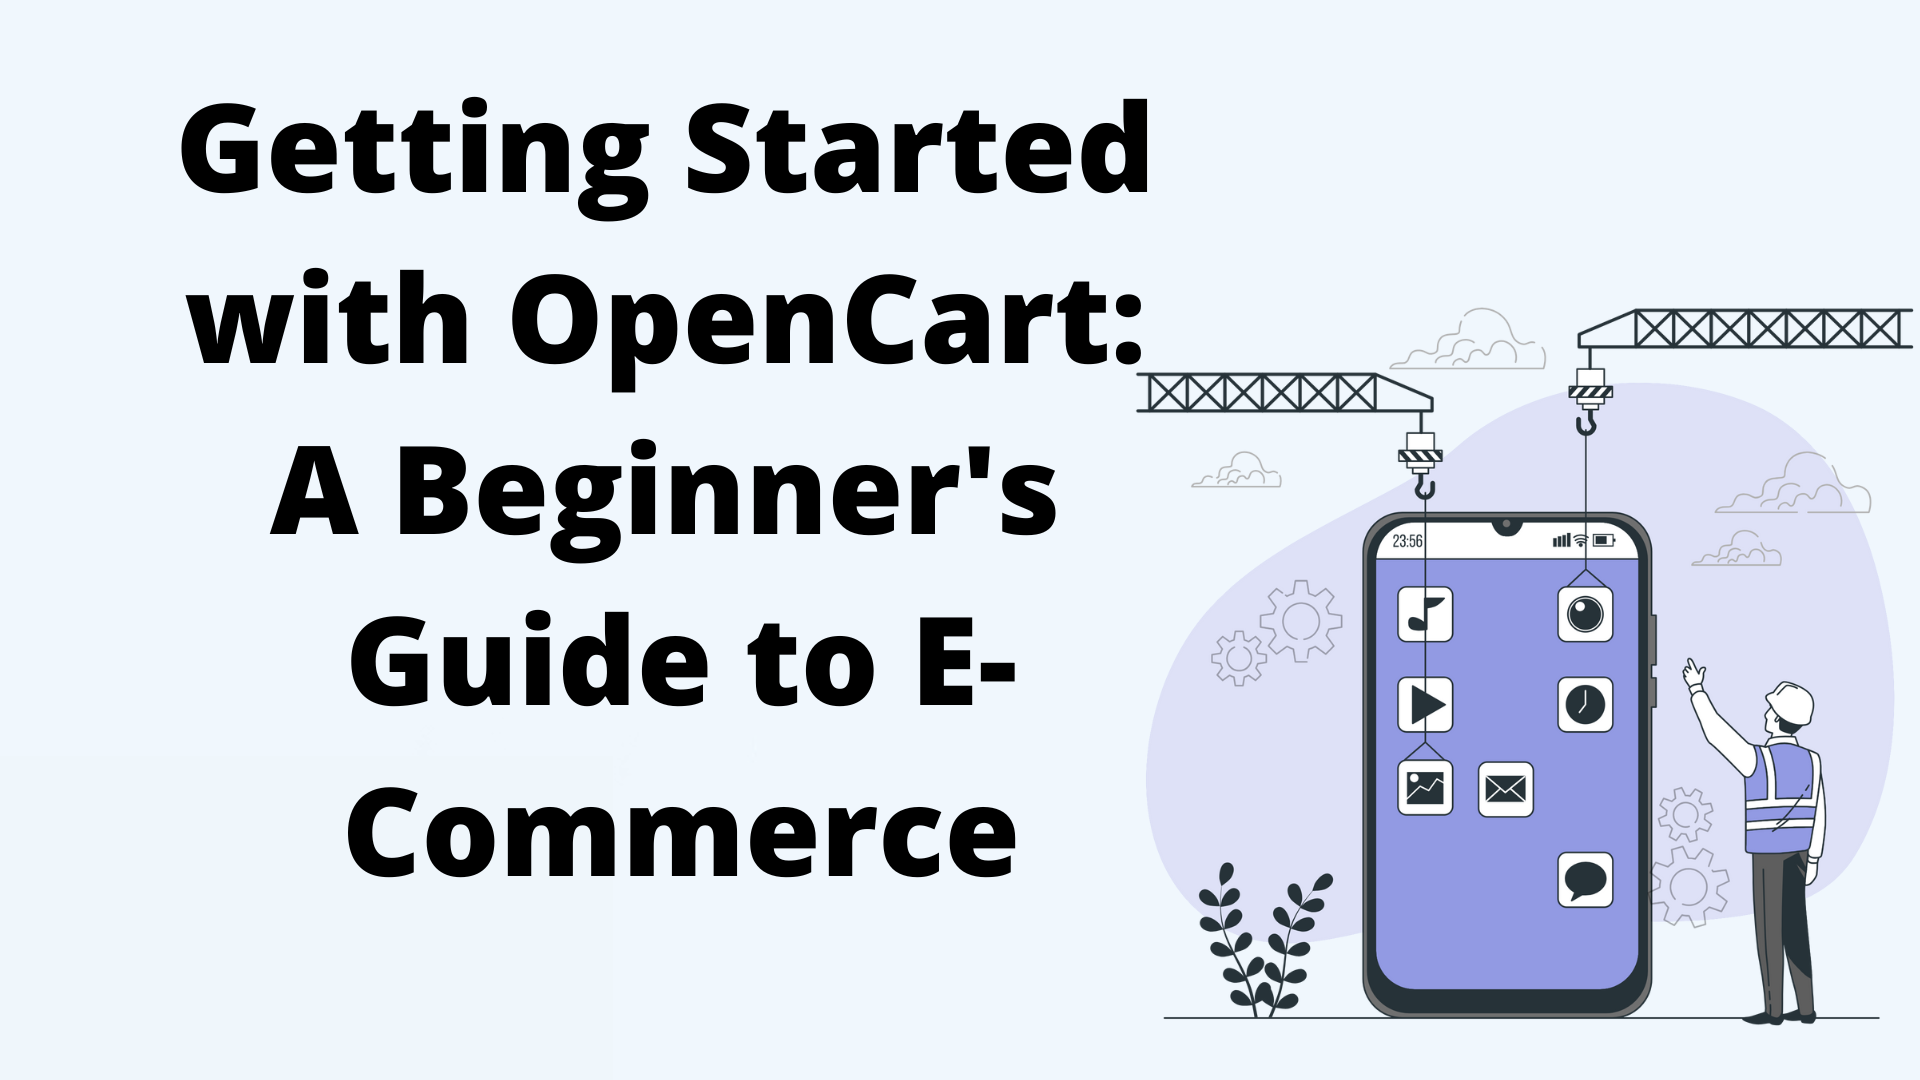 Getting Started with OpenCart A Beginner's Guide to E-Commerce